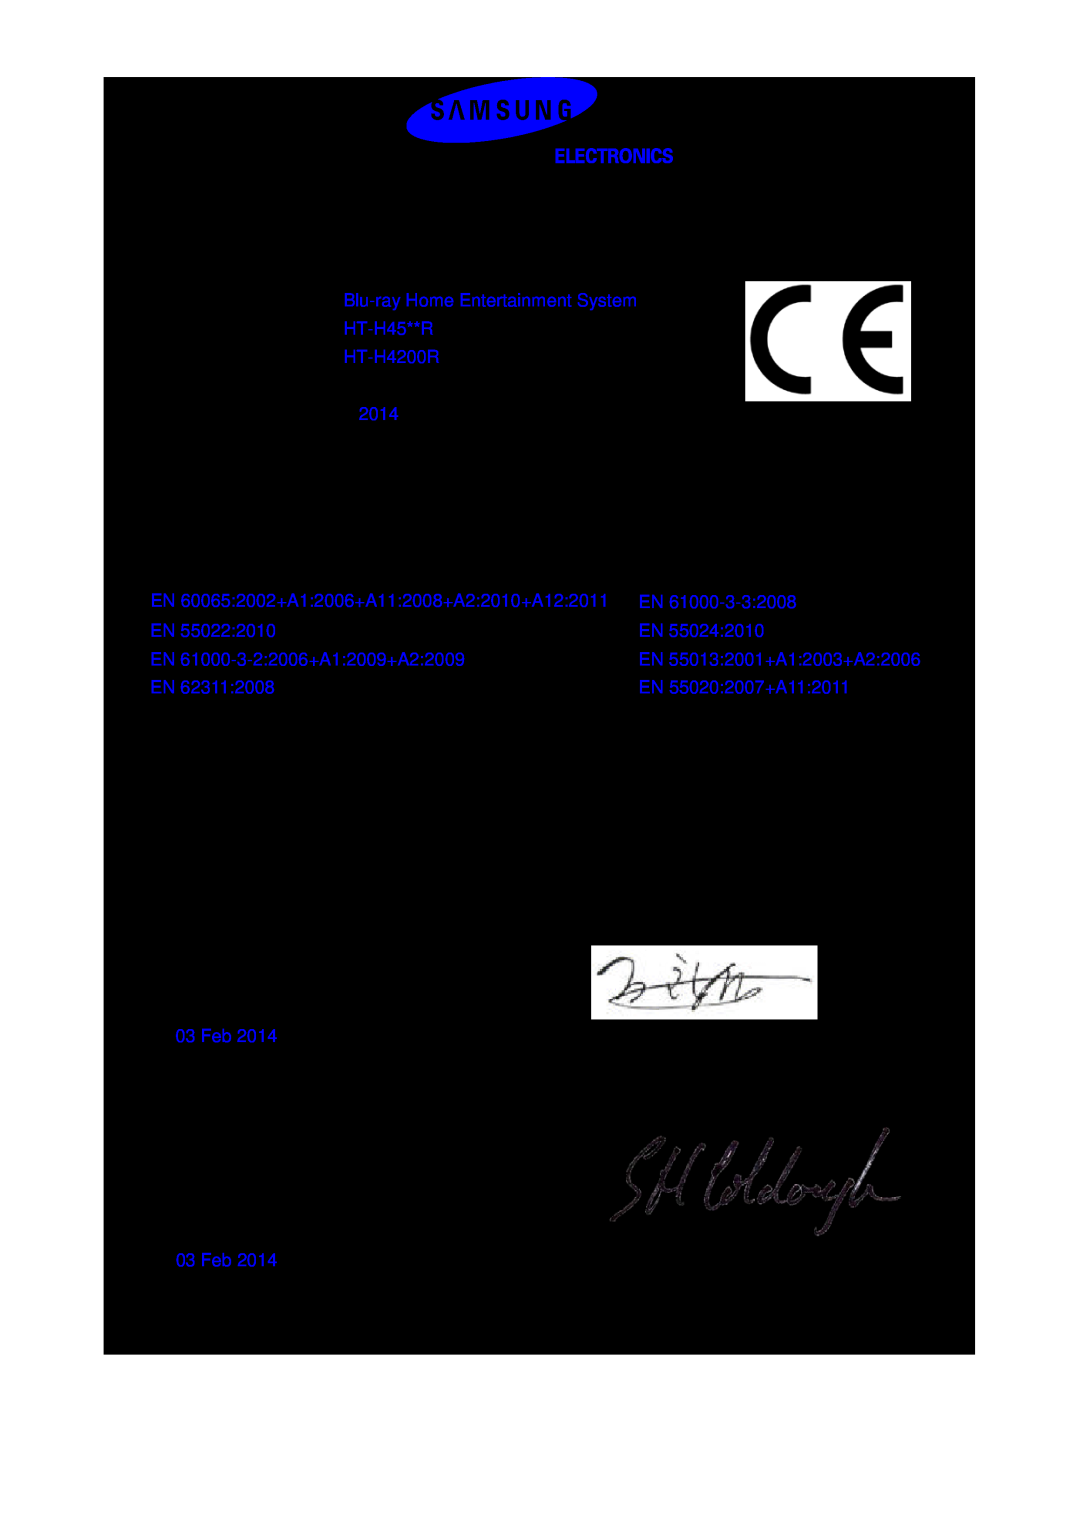 Samsung HT-H4550R/EN, HT-H4200R/EN, HT-H4550R/TK, HT-H4500R/EN, HT-H4500R/ZF, HT-H4200R/ZF manual Declaration of Conformity 